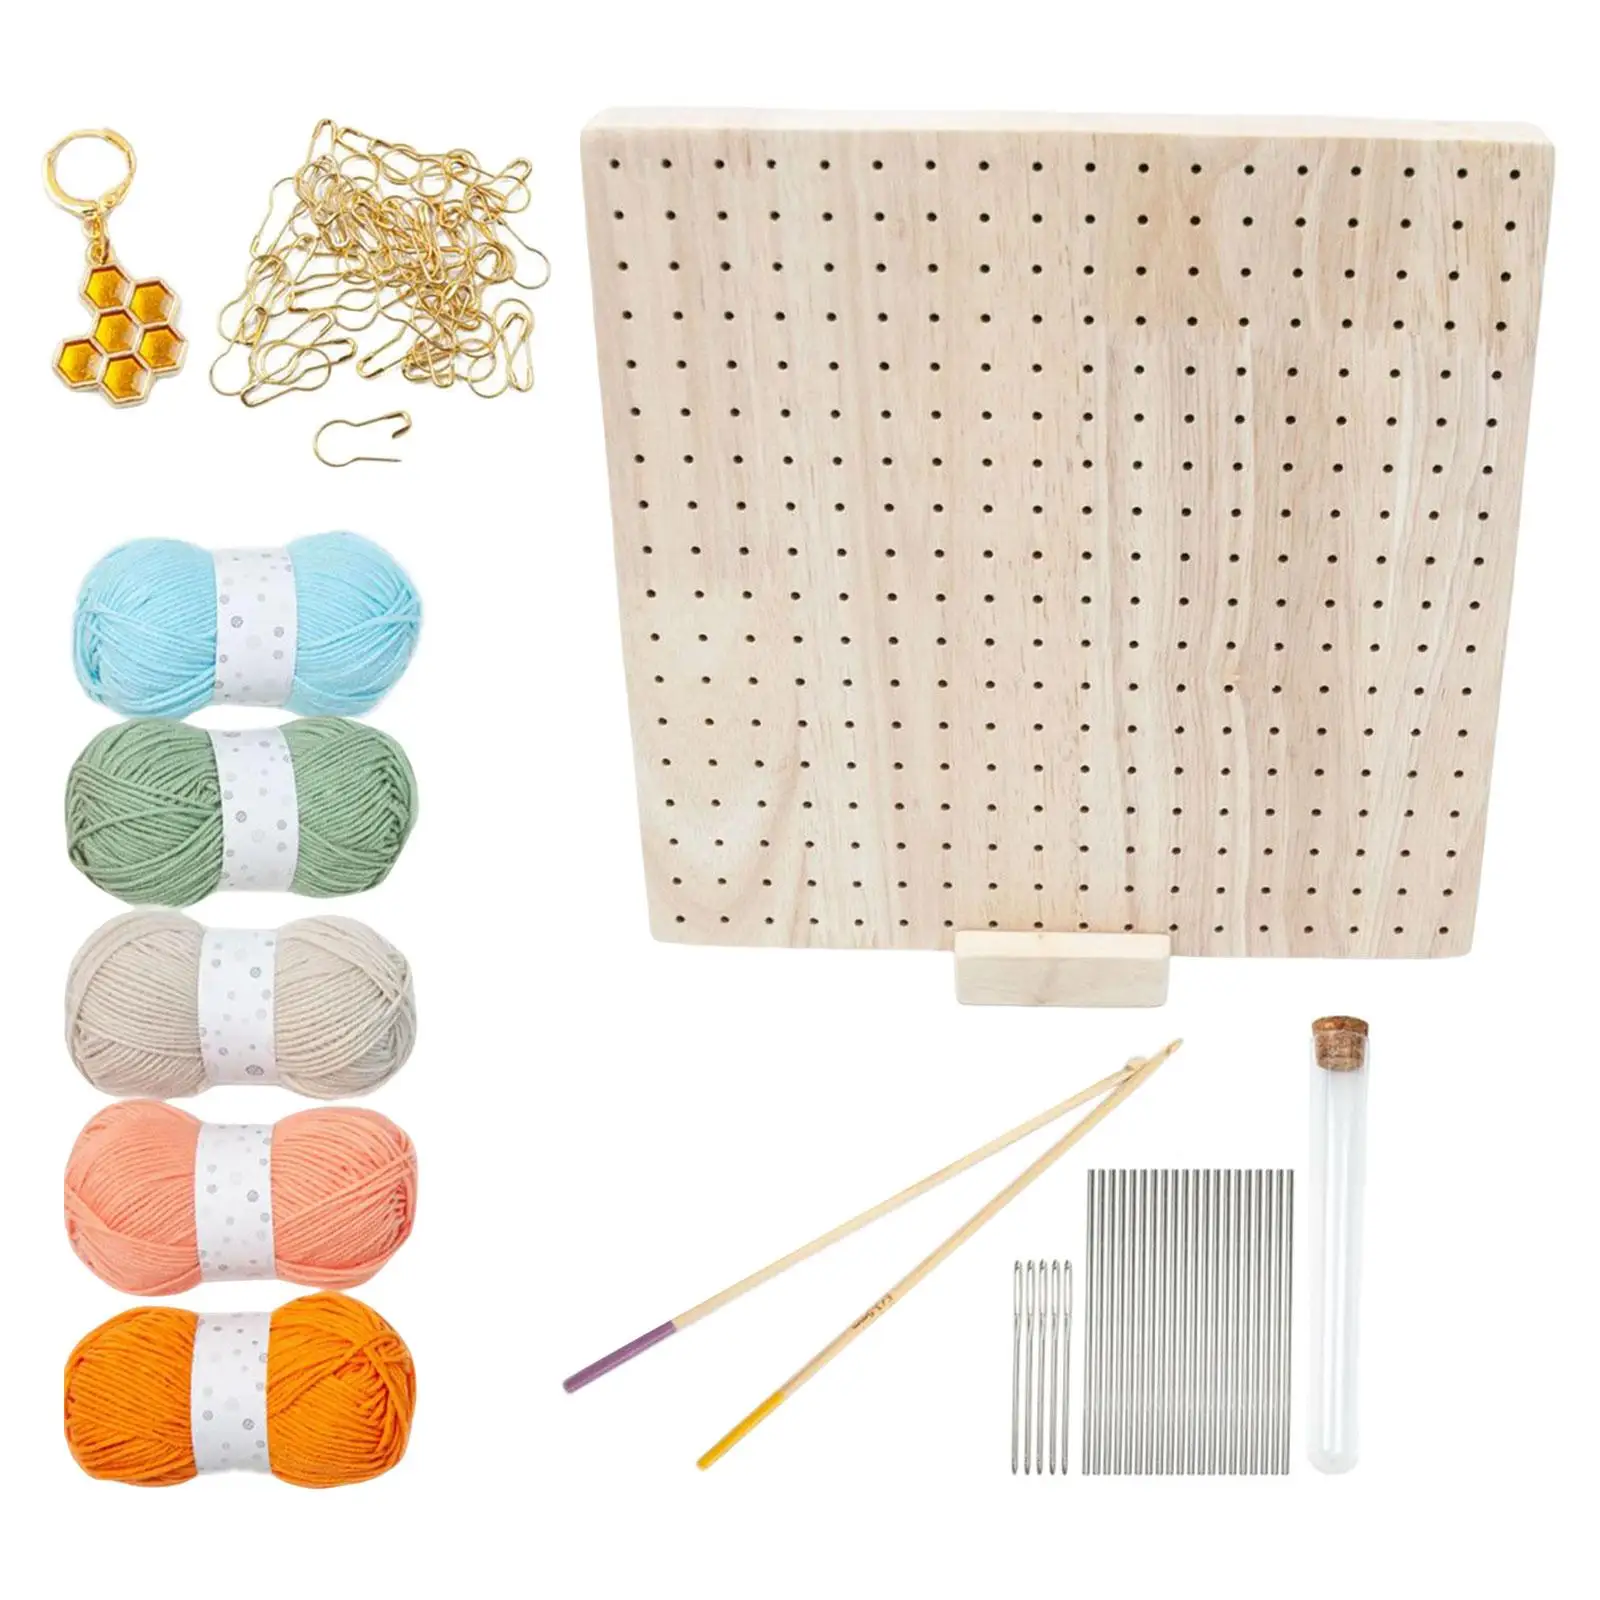 Blocking Board Set Handcrafted Knitting Solid Blocking Mats for Craft Weave Knitting Crochet Sewing Supplies Handy DIY Lovers